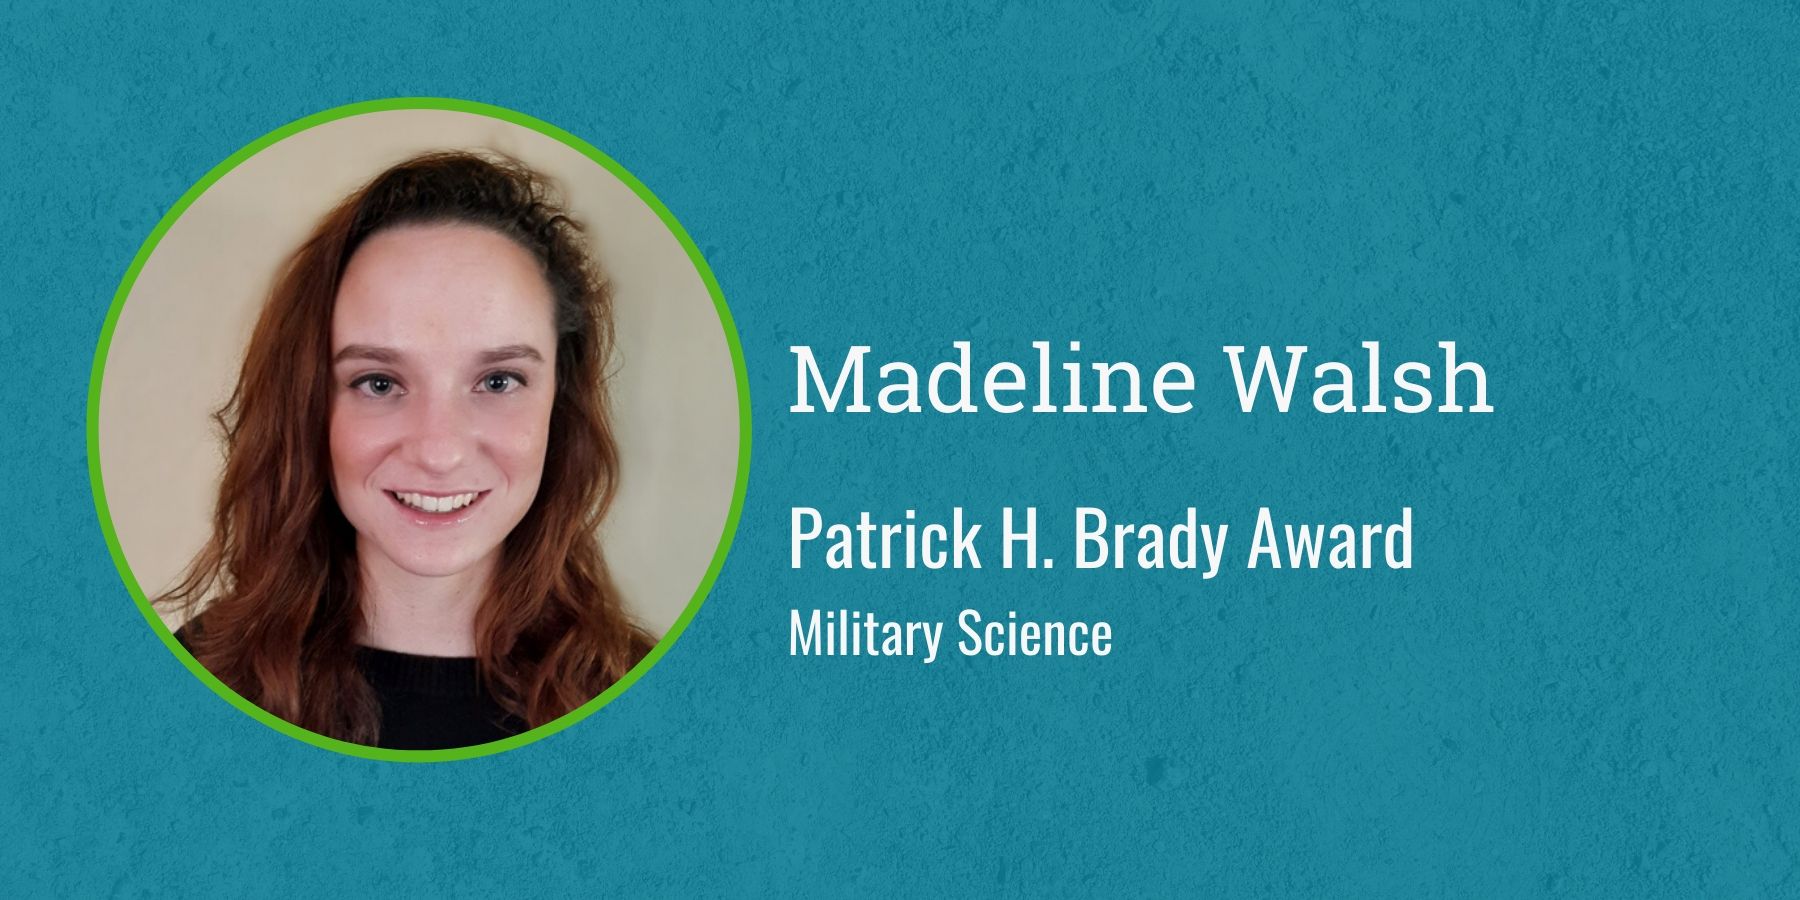 Photo of Madeline Walsh and text Patrick H. Brady Award, Military Science